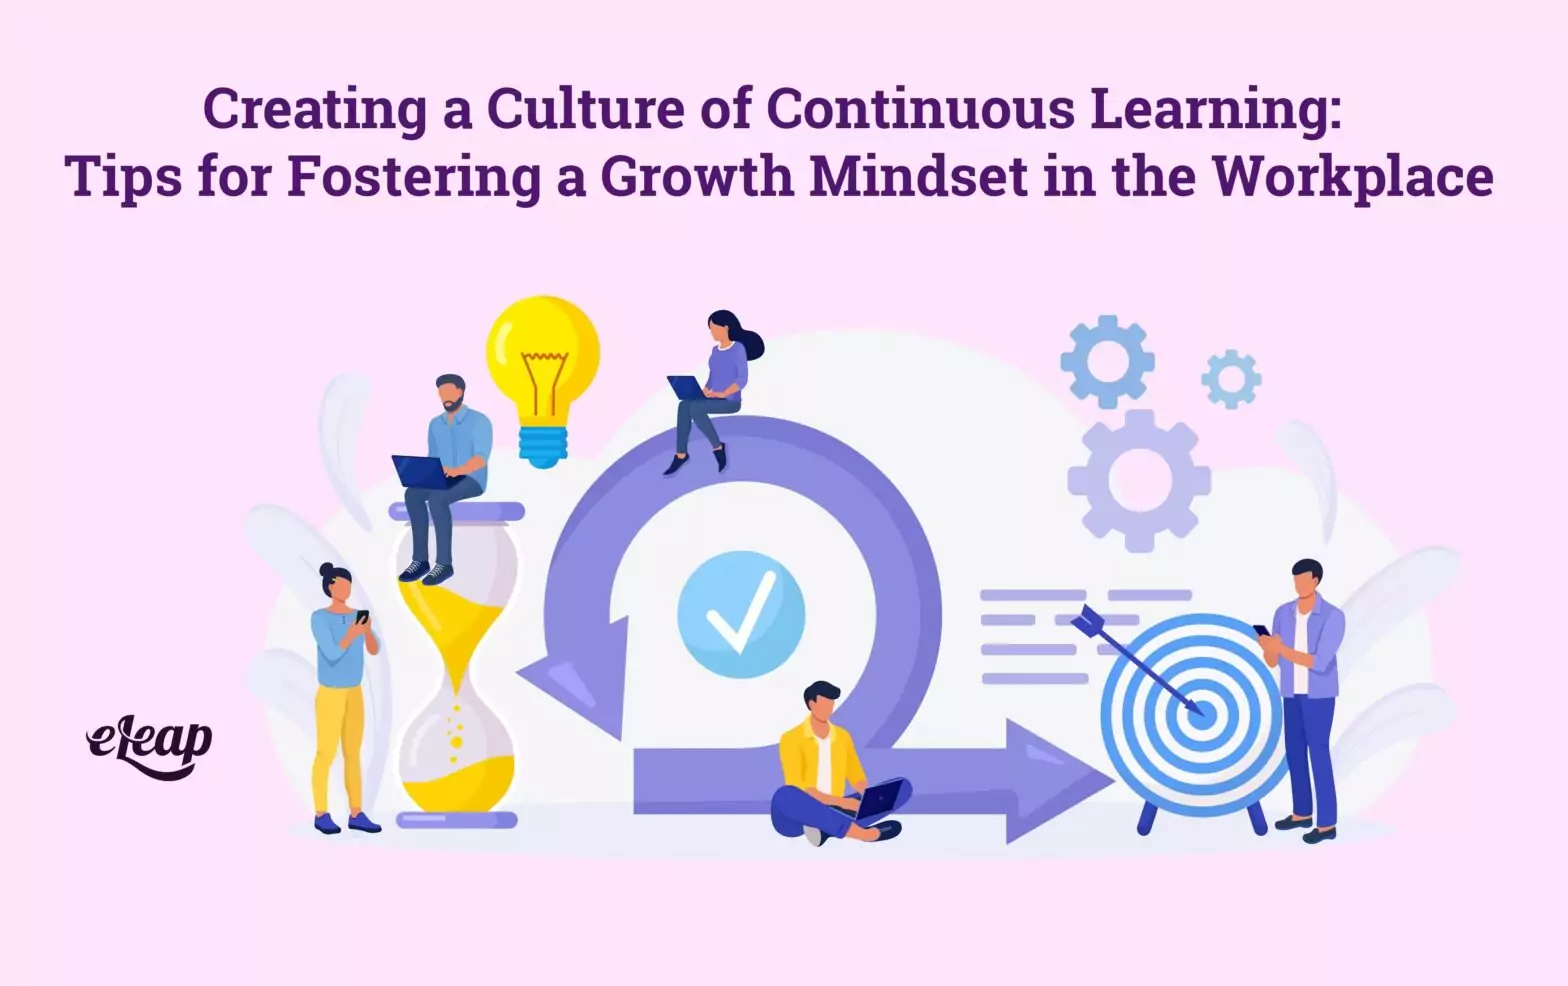 Creating a Culture of Continuous Learning: Tips for Fostering a Growth Mindset in the Workplace